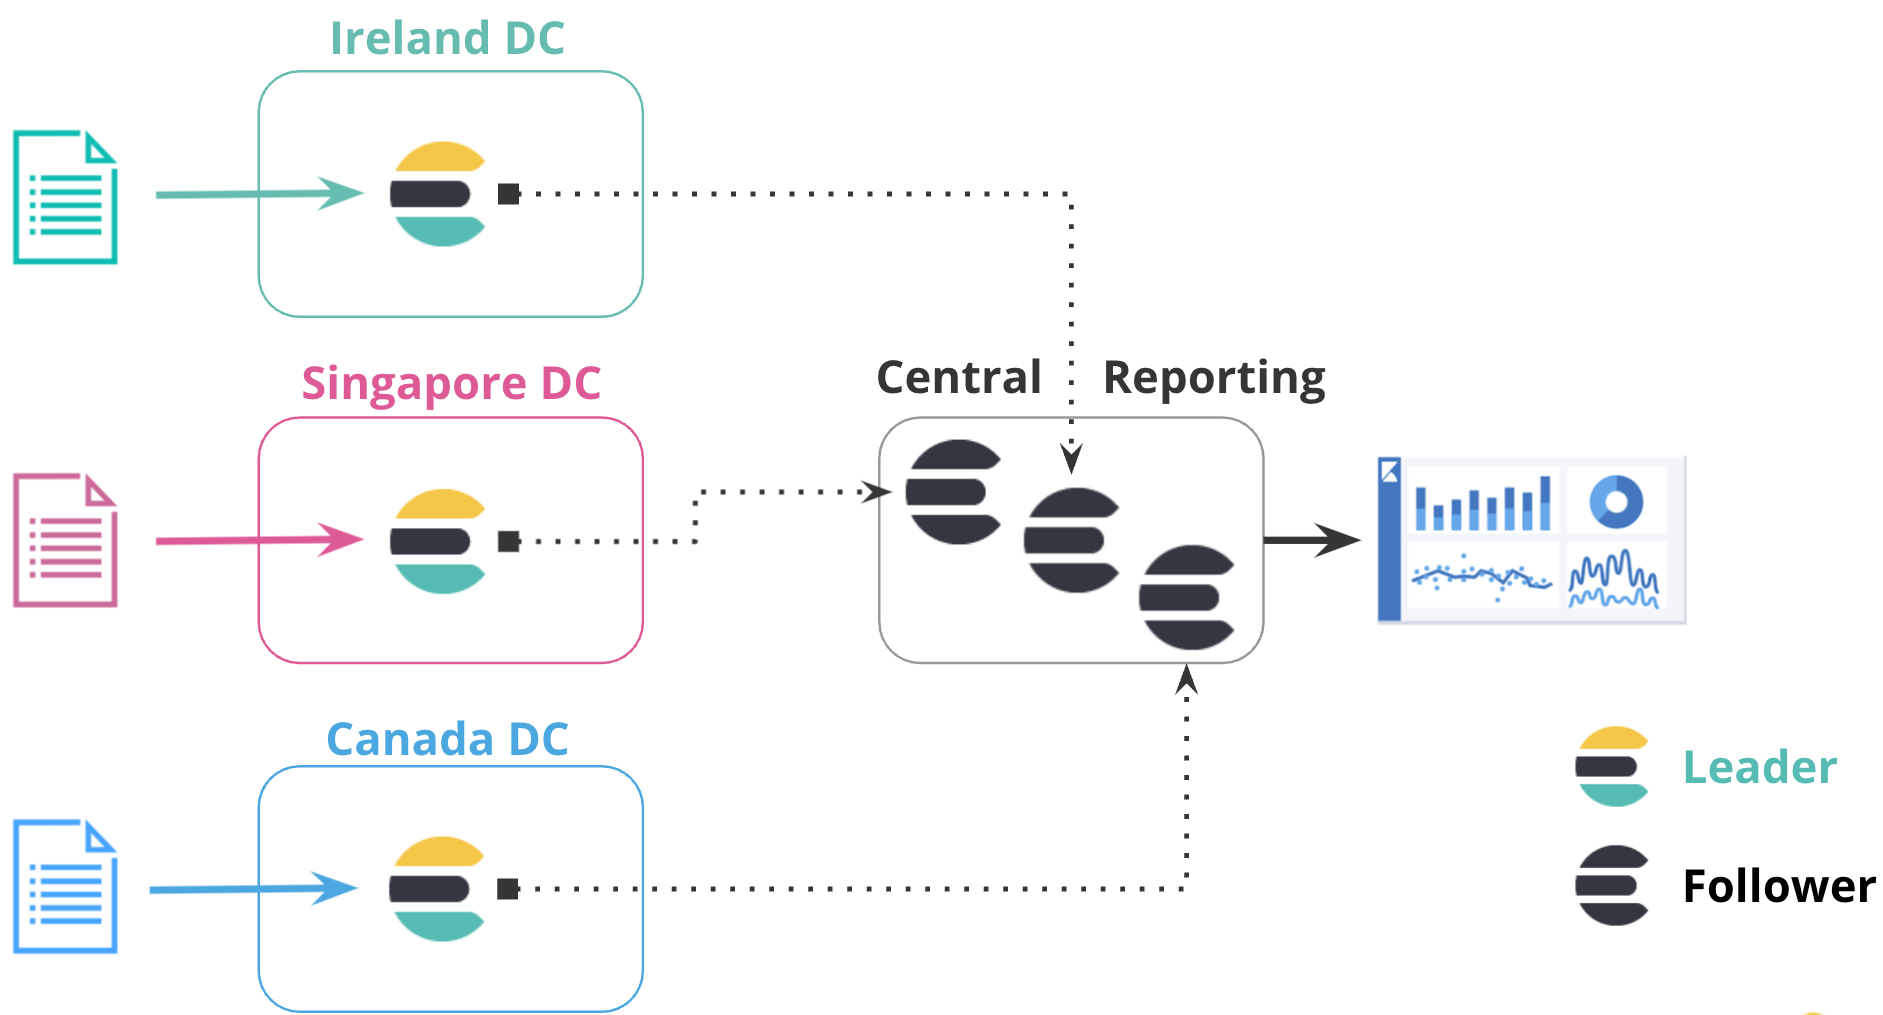 Three clusters in different regions sending data to a centralized reporting cluster for analysis